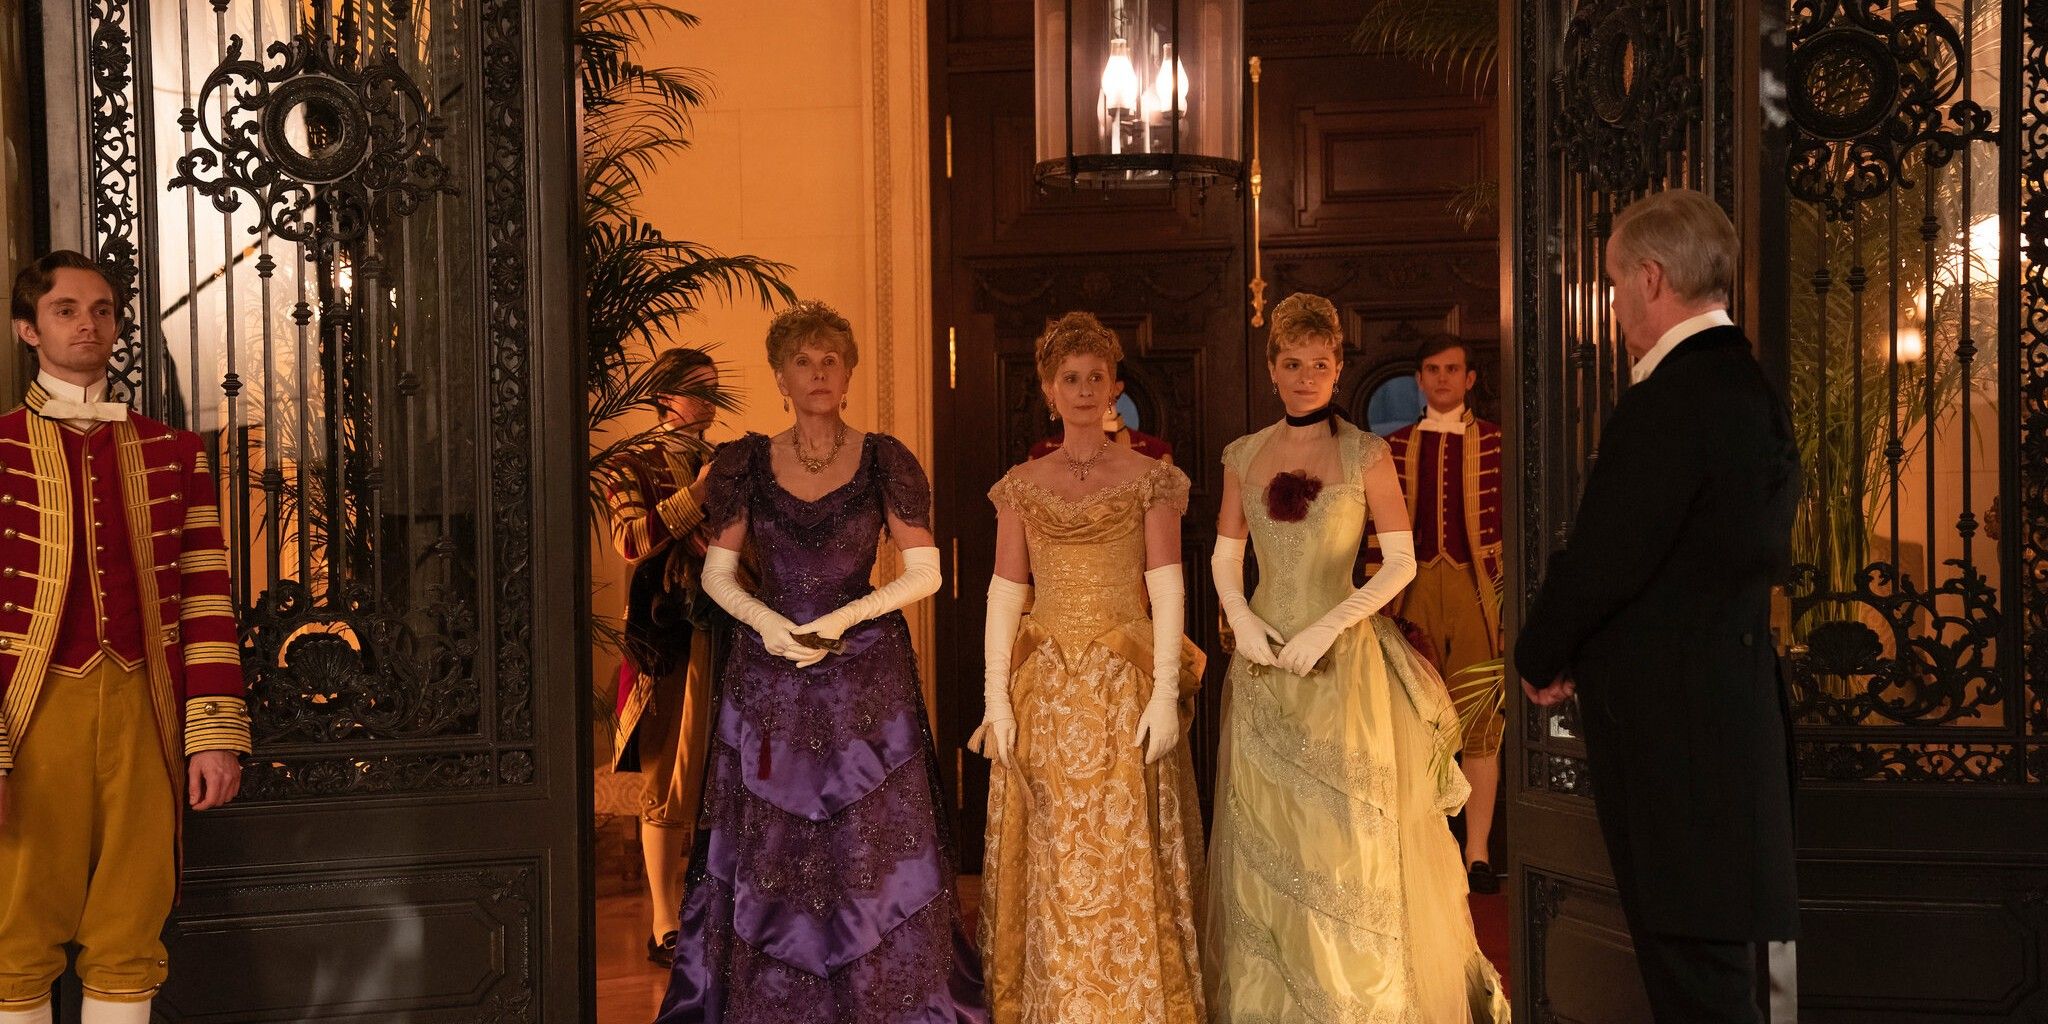 Marian and her aunts arrive at a home in the gilded age